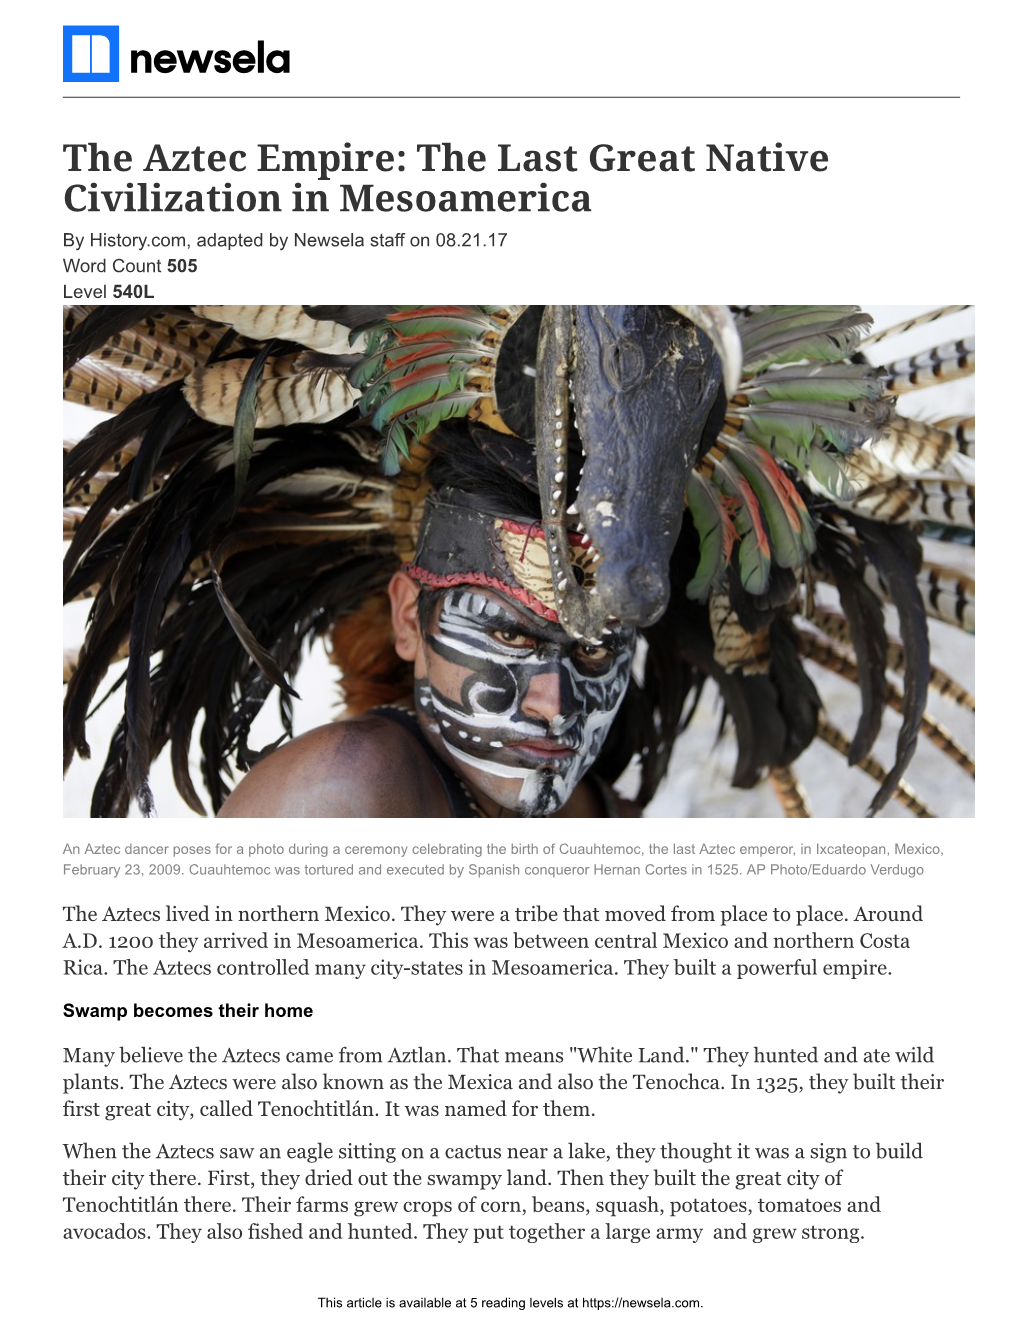 The Aztec Empire: the Last Great Native Civilization in Mesoamerica by History.Com, Adapted by Newsela Staff on 08.21.17 Word Count 505 Level 540L